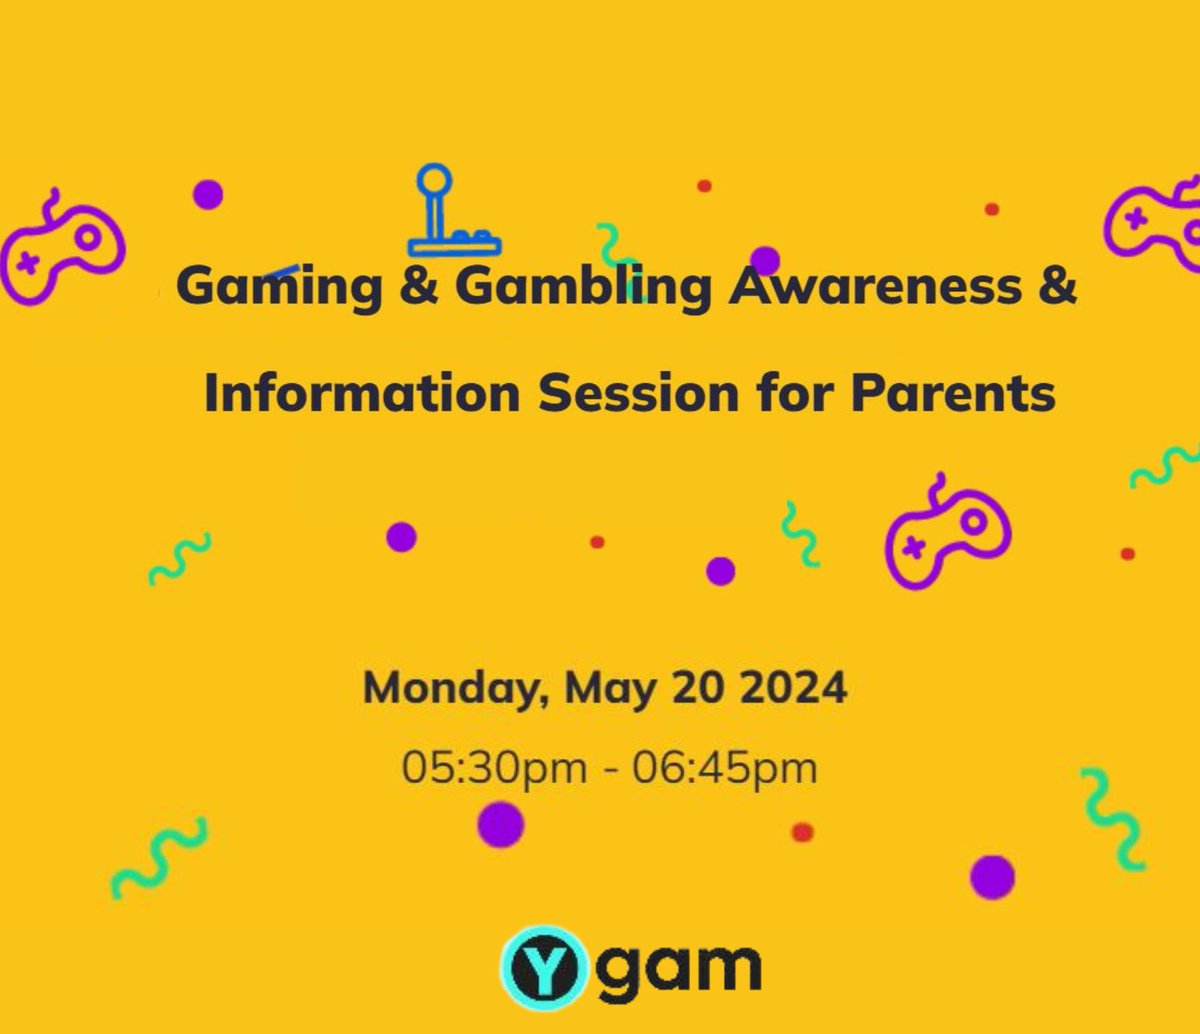 .@YgamUK are delivering a session designed for parents, carers or anyone who may have young people in their lives & want to find out more about gaming & gambling awareness. Find out more here volunteernow.co.uk/gaming-gamblin… #Safeguarding